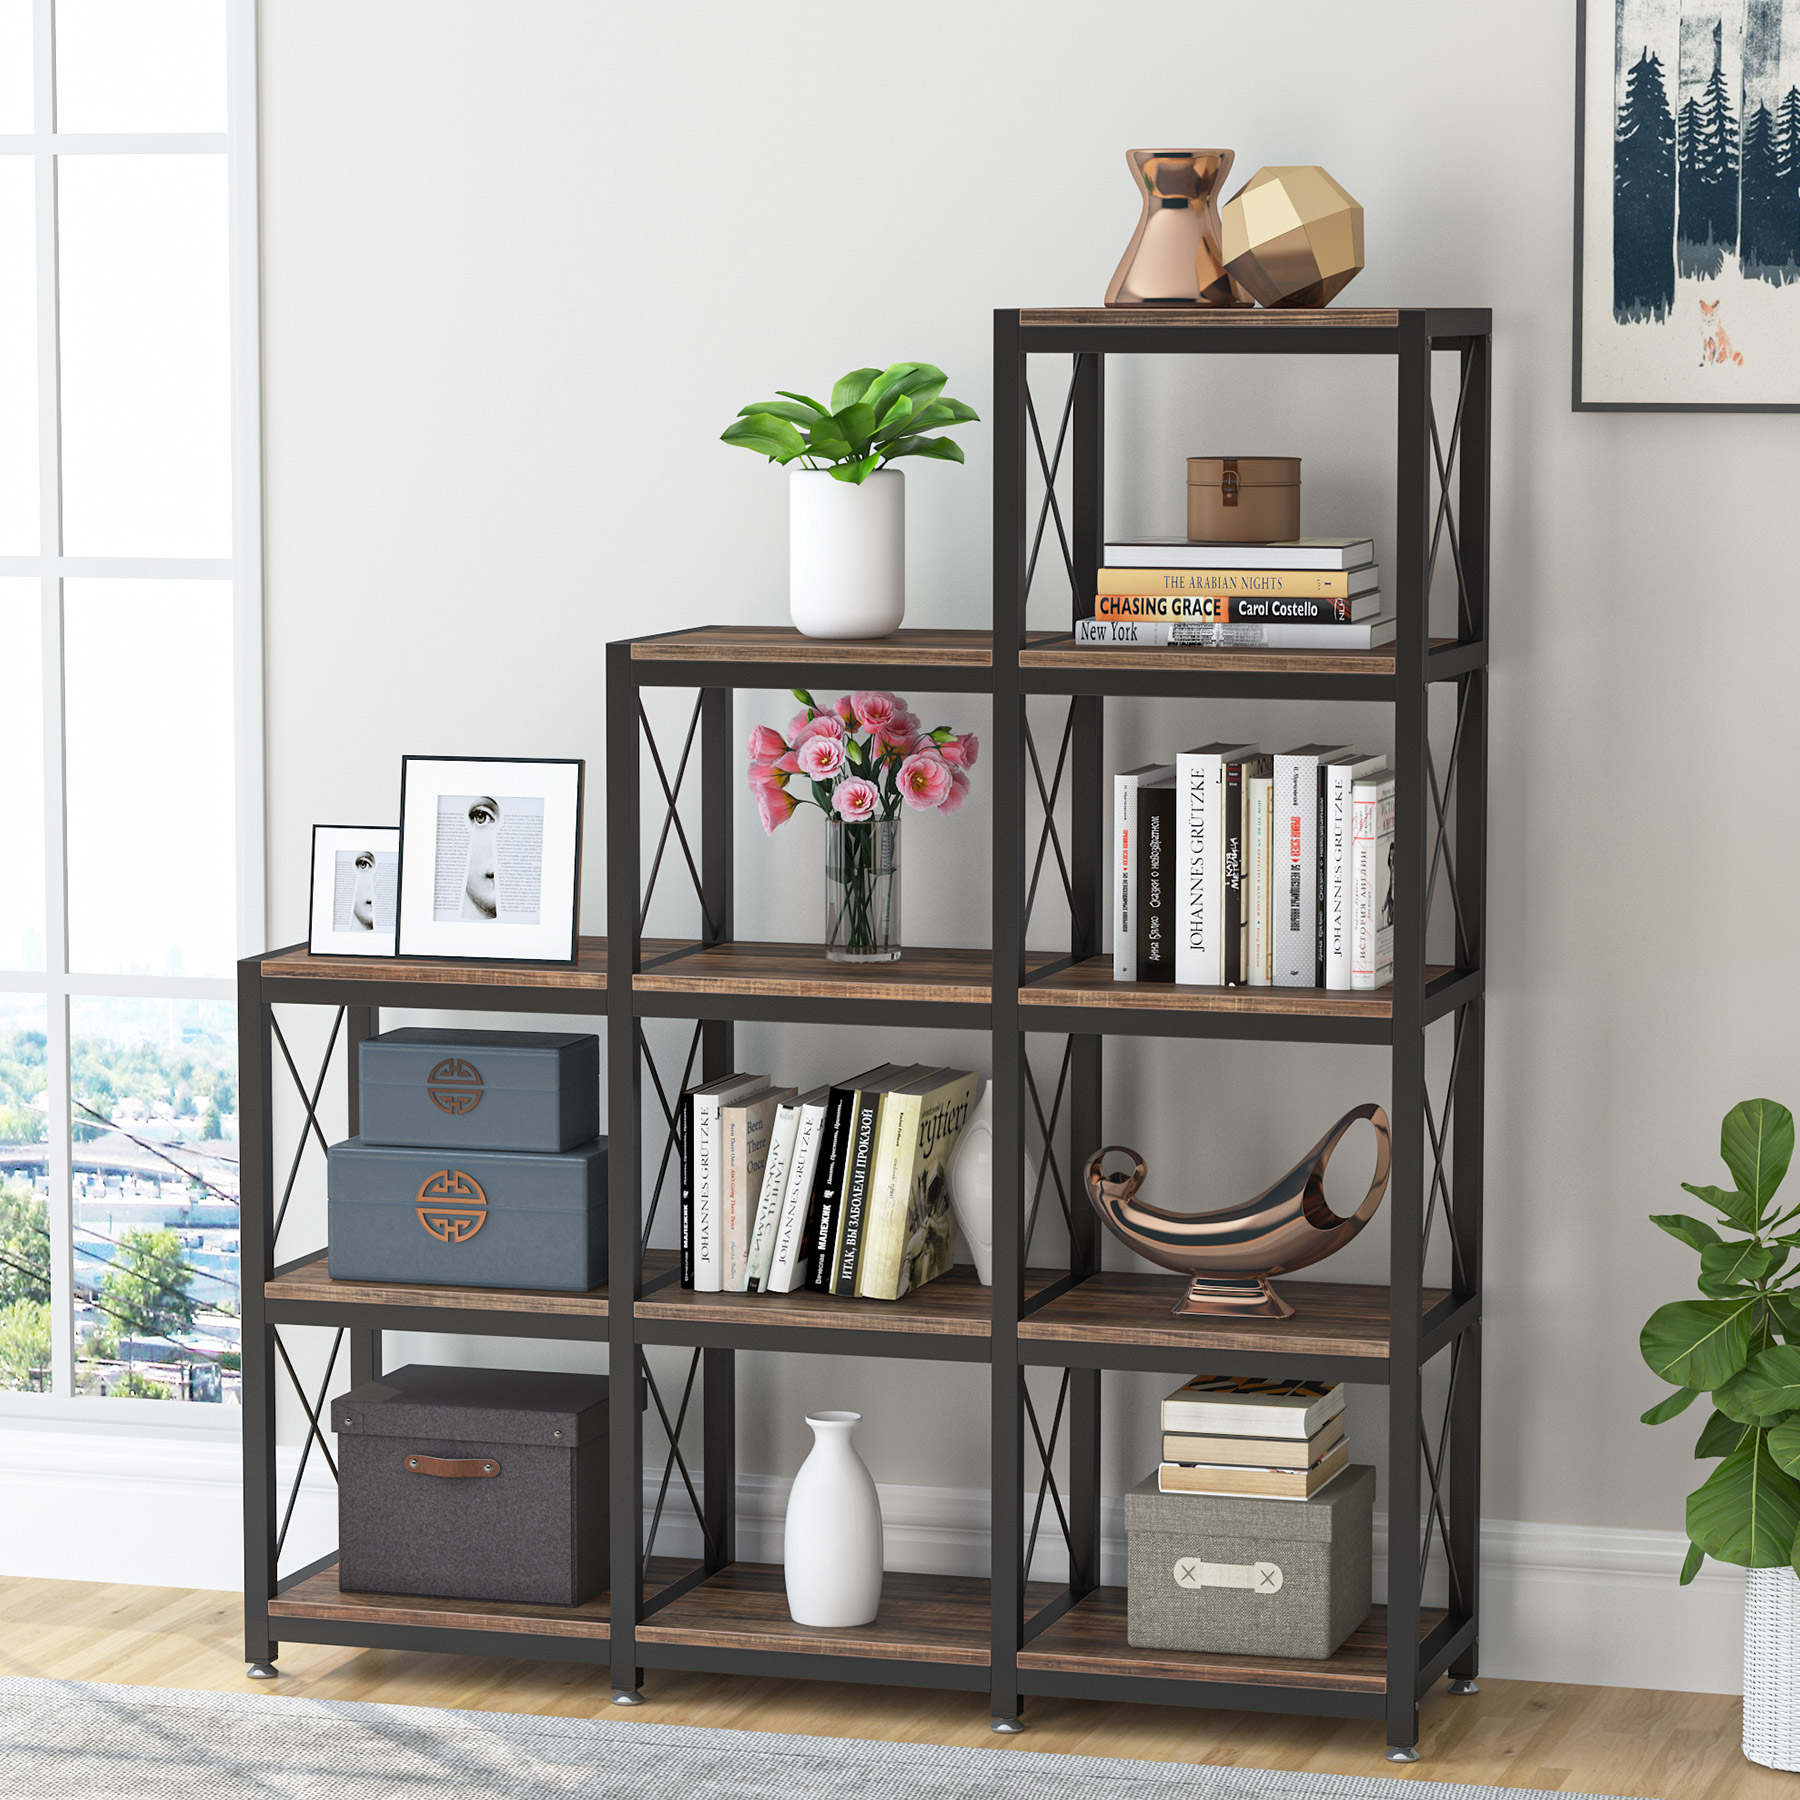 Tribesigns 12-shelf Bookcase, 5-tier Industrial Step Bookshelf for Home Office, Rustic Brown - image 1 of 7